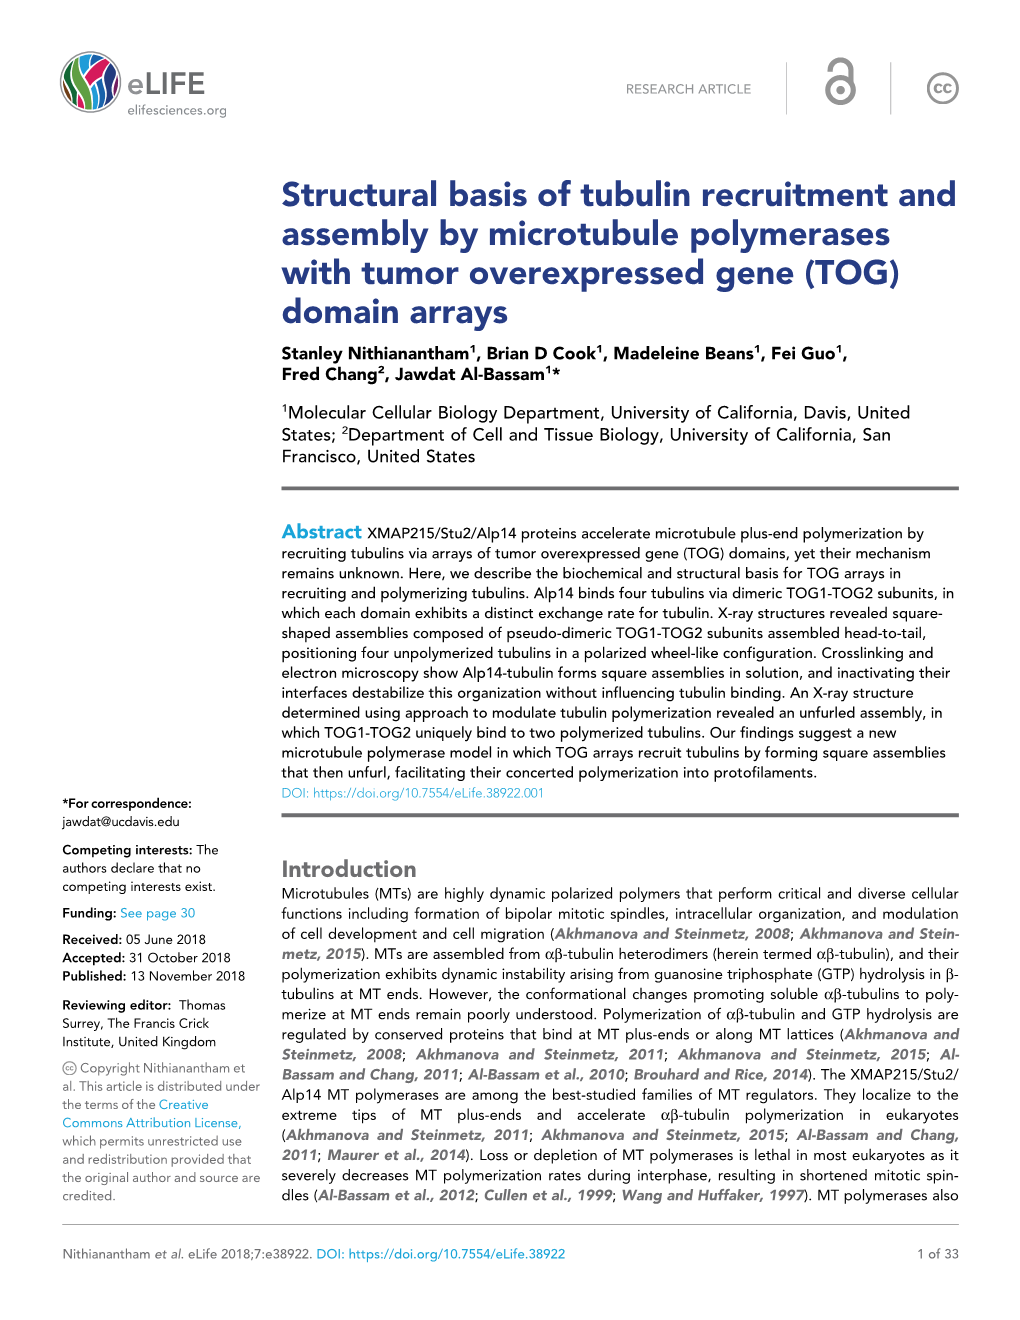 Structural Basis of Tubulin Recruitment and Assembly by Microtubule